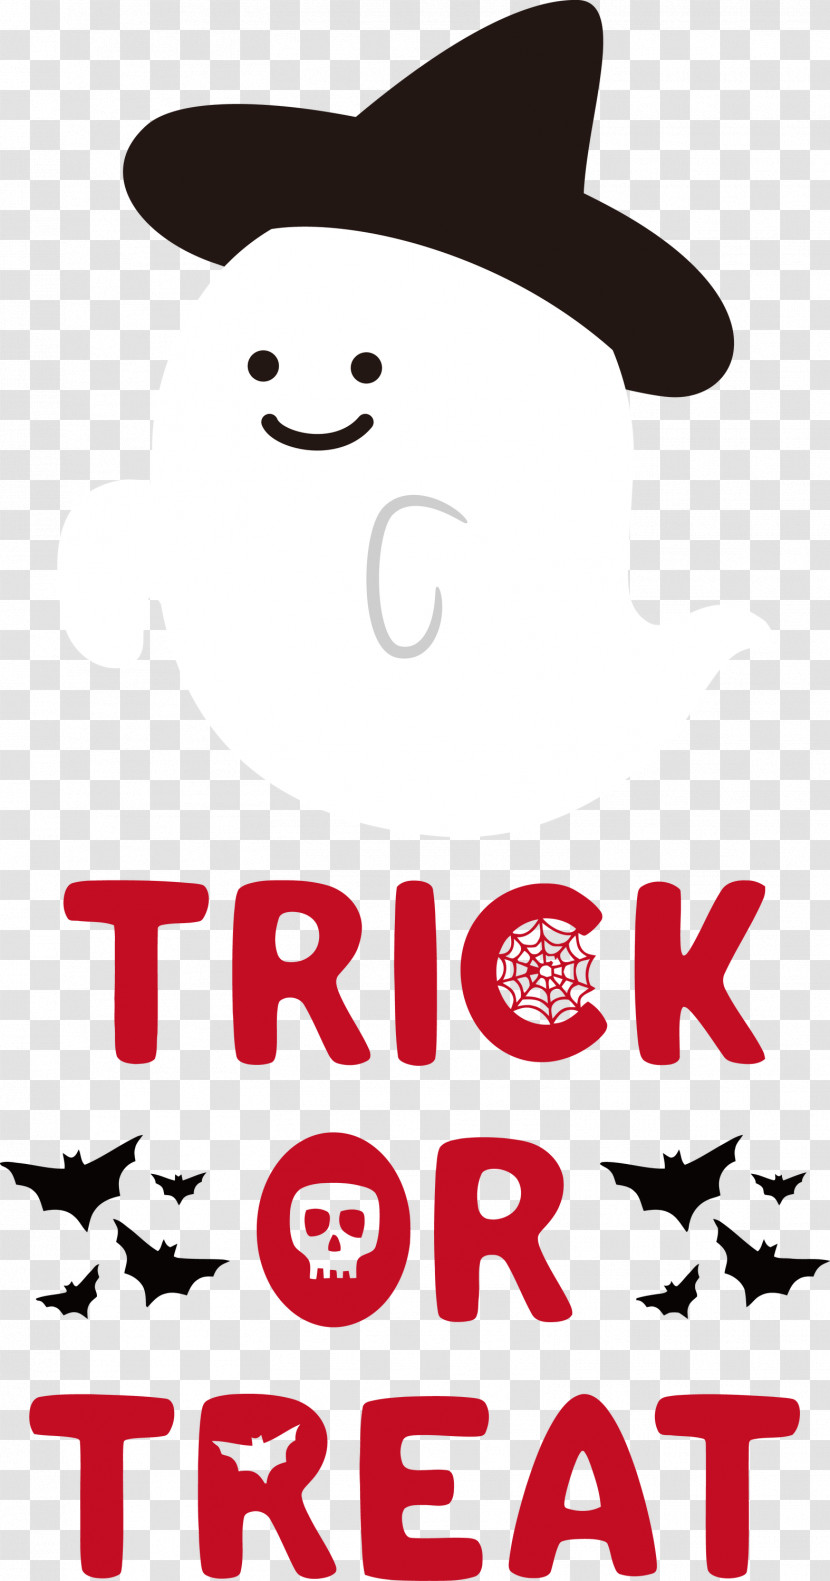 Trick Or Treat Halloween Trick-or-treating Transparent PNG